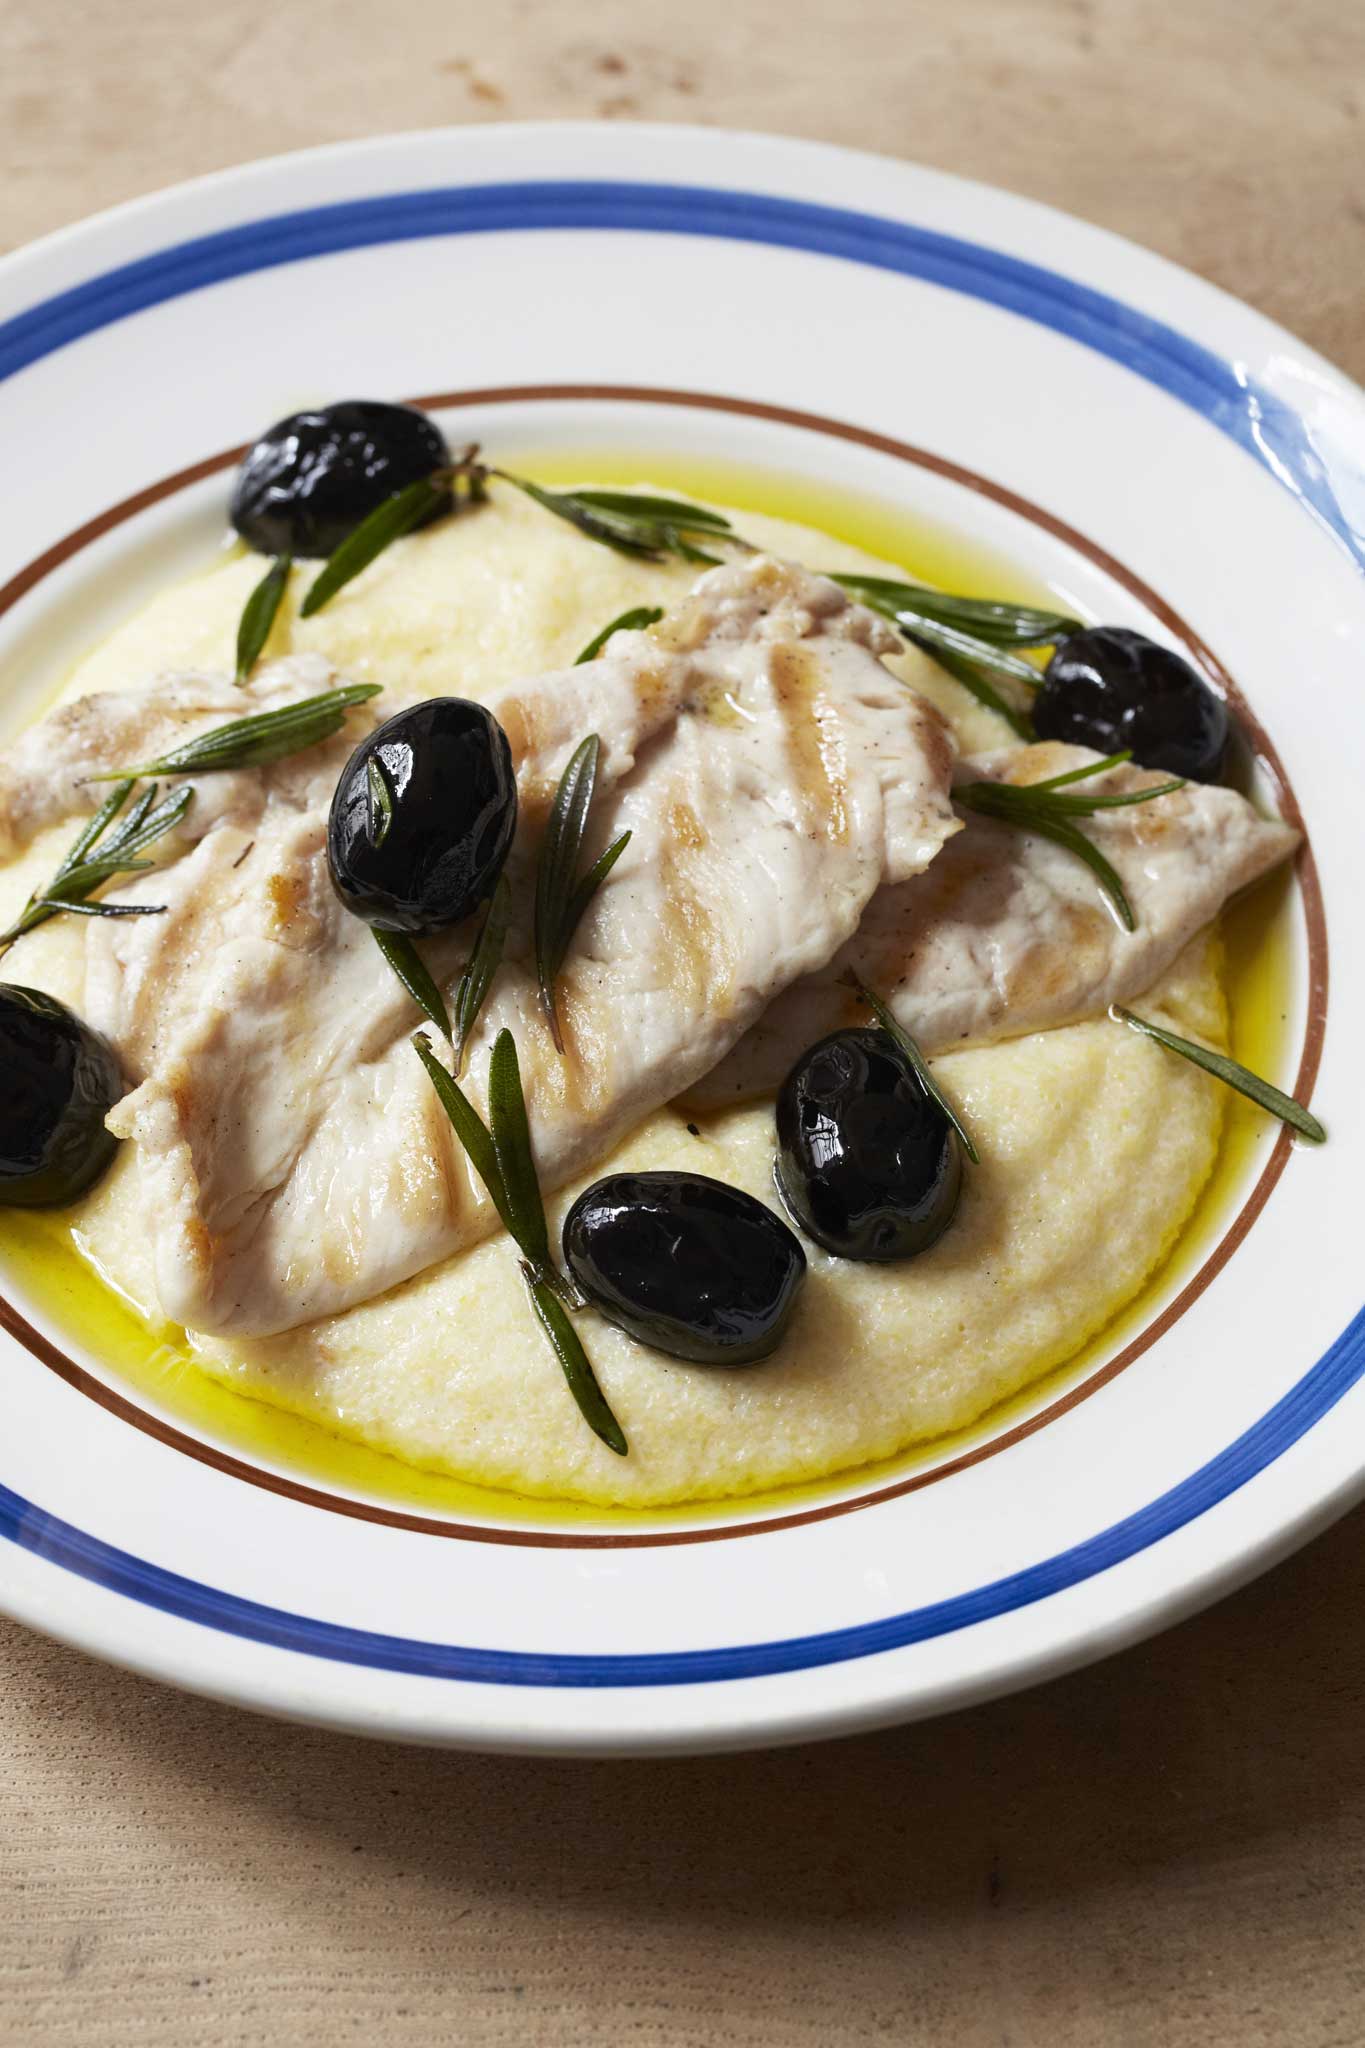 Chicken piccatas with polenta, black olives and rosemary